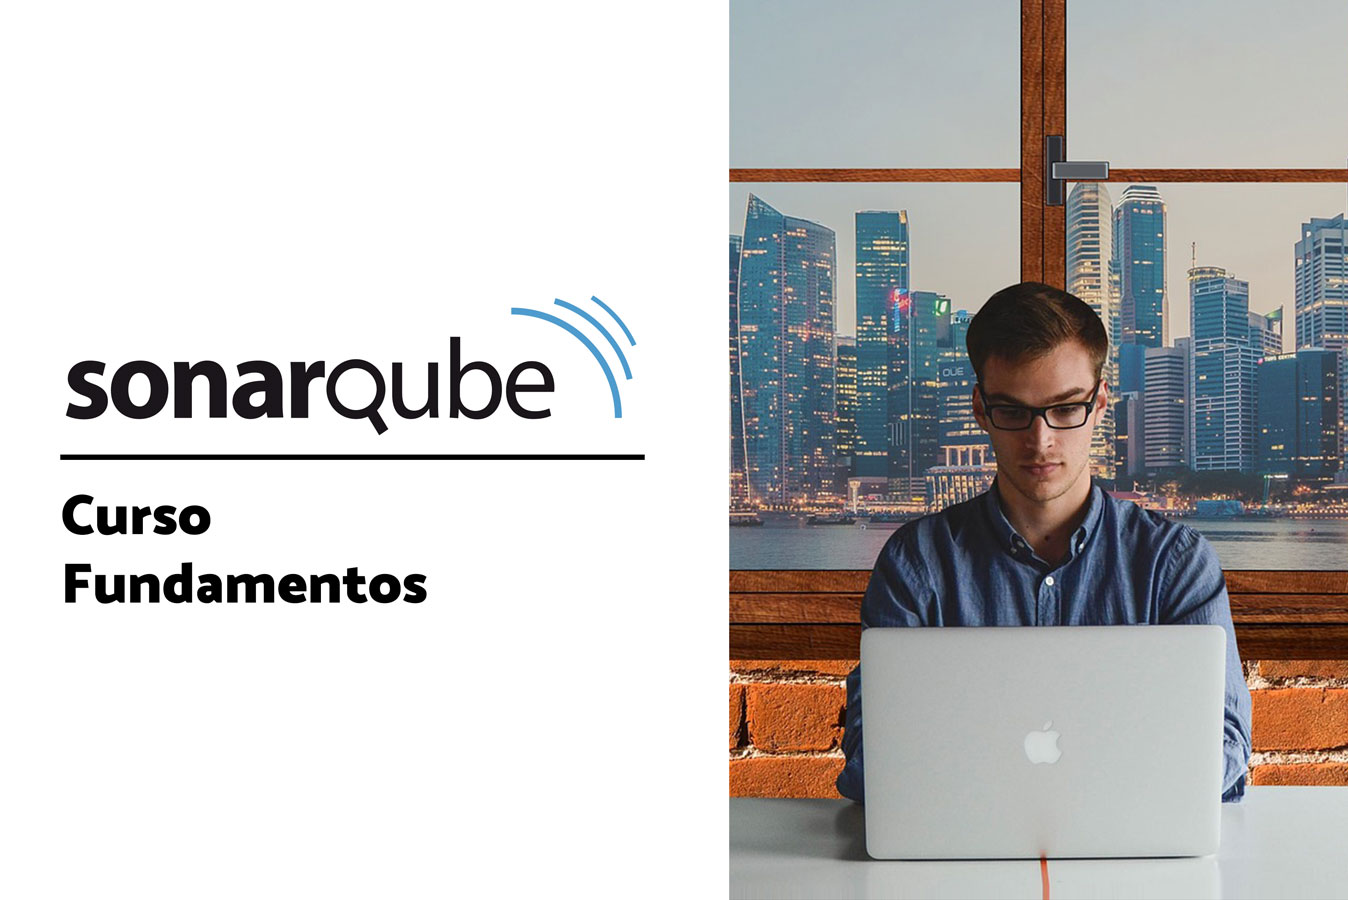 SonarQube Fundamentals courses in Spanish for companies and professionals